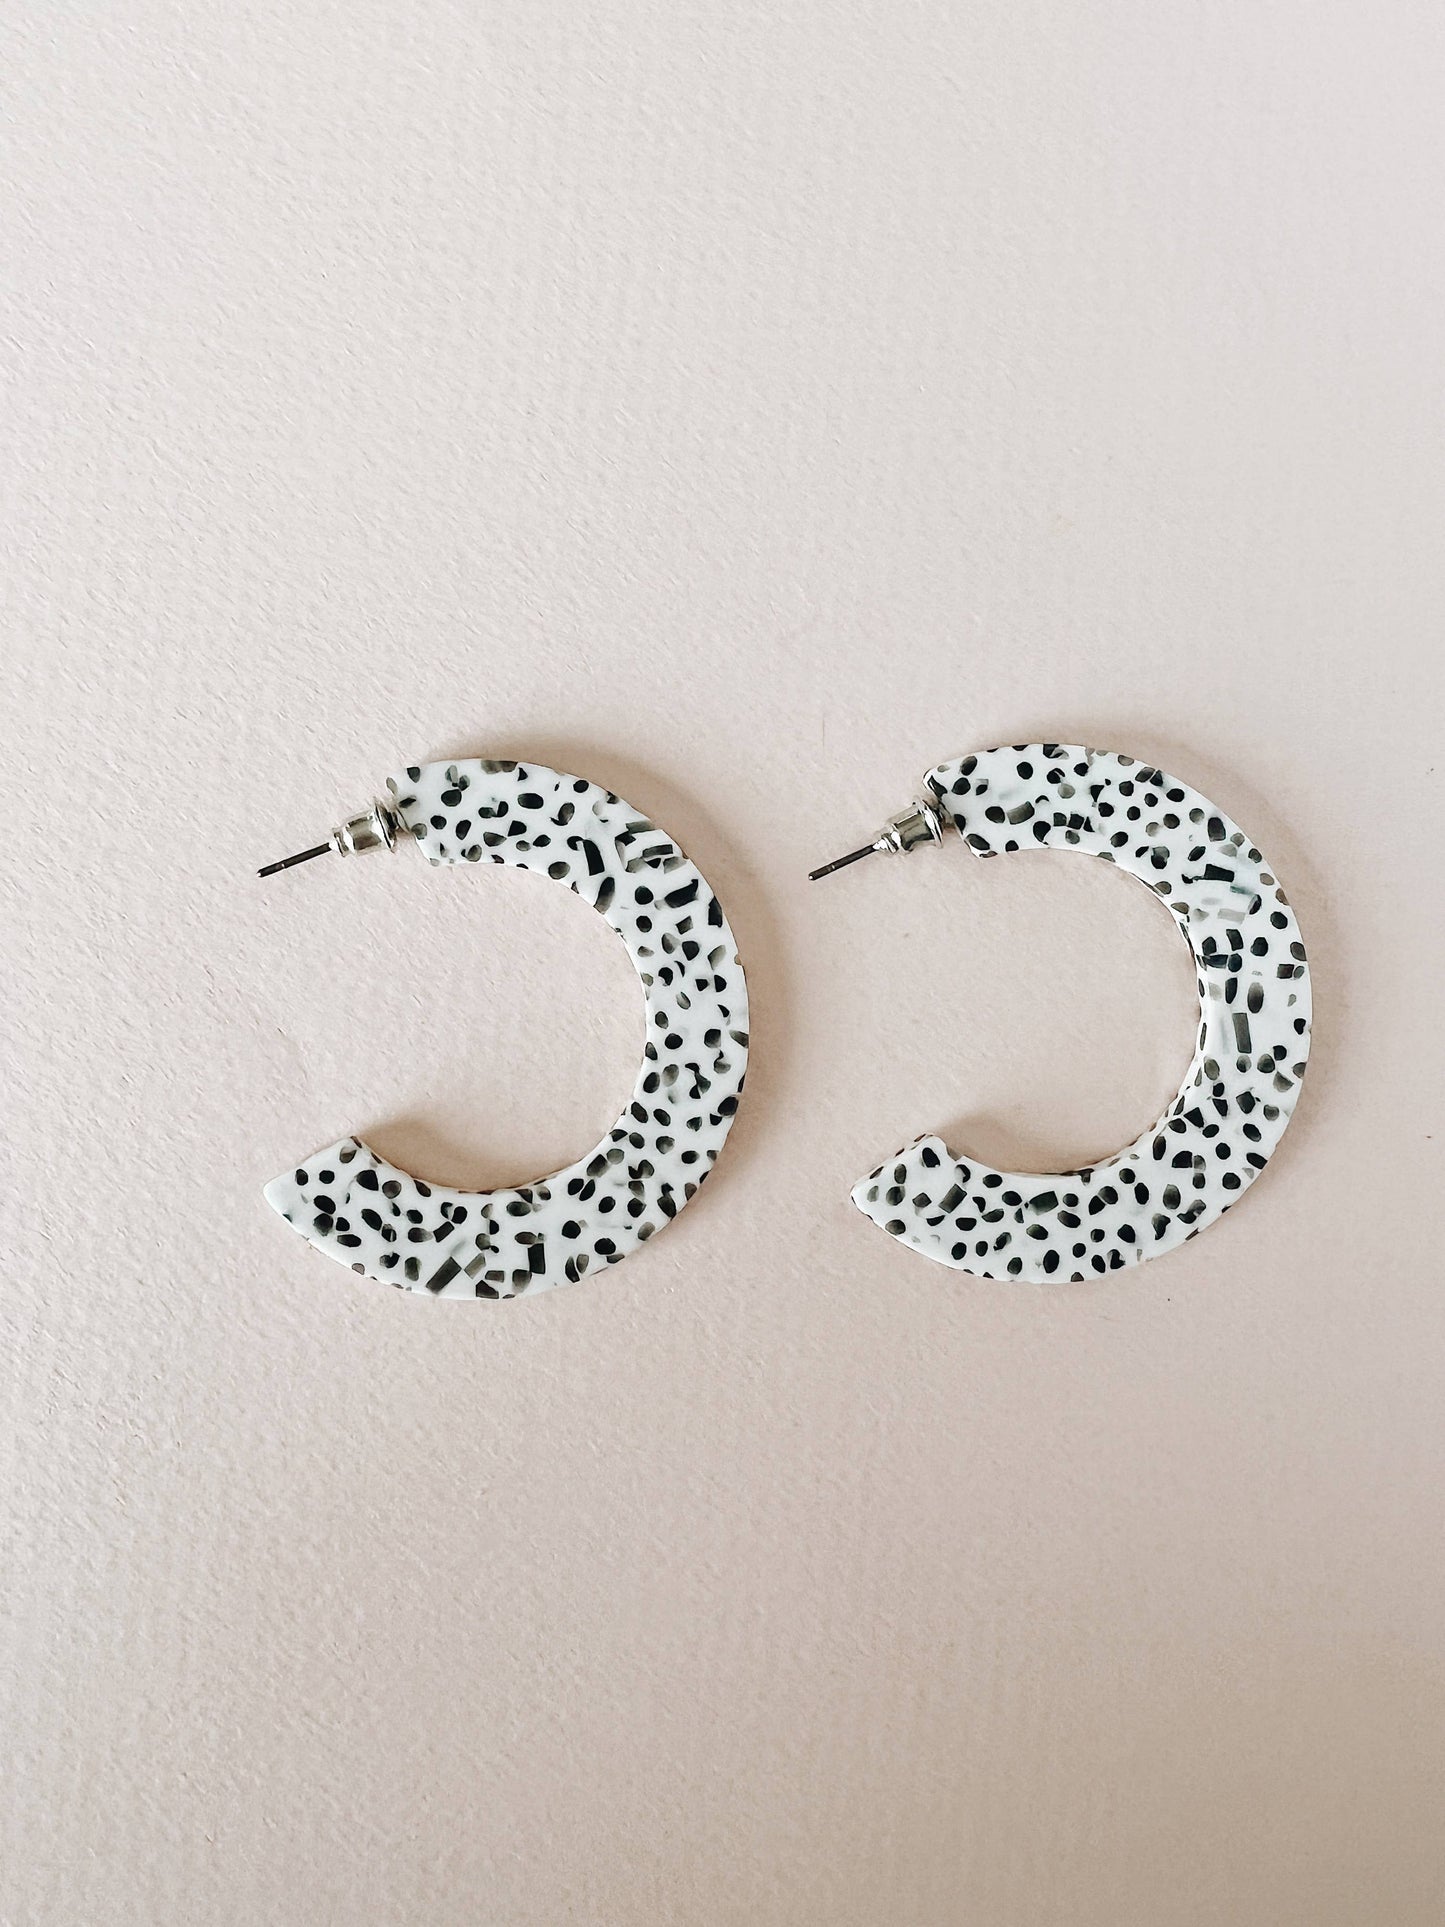 printed cellulose earrings